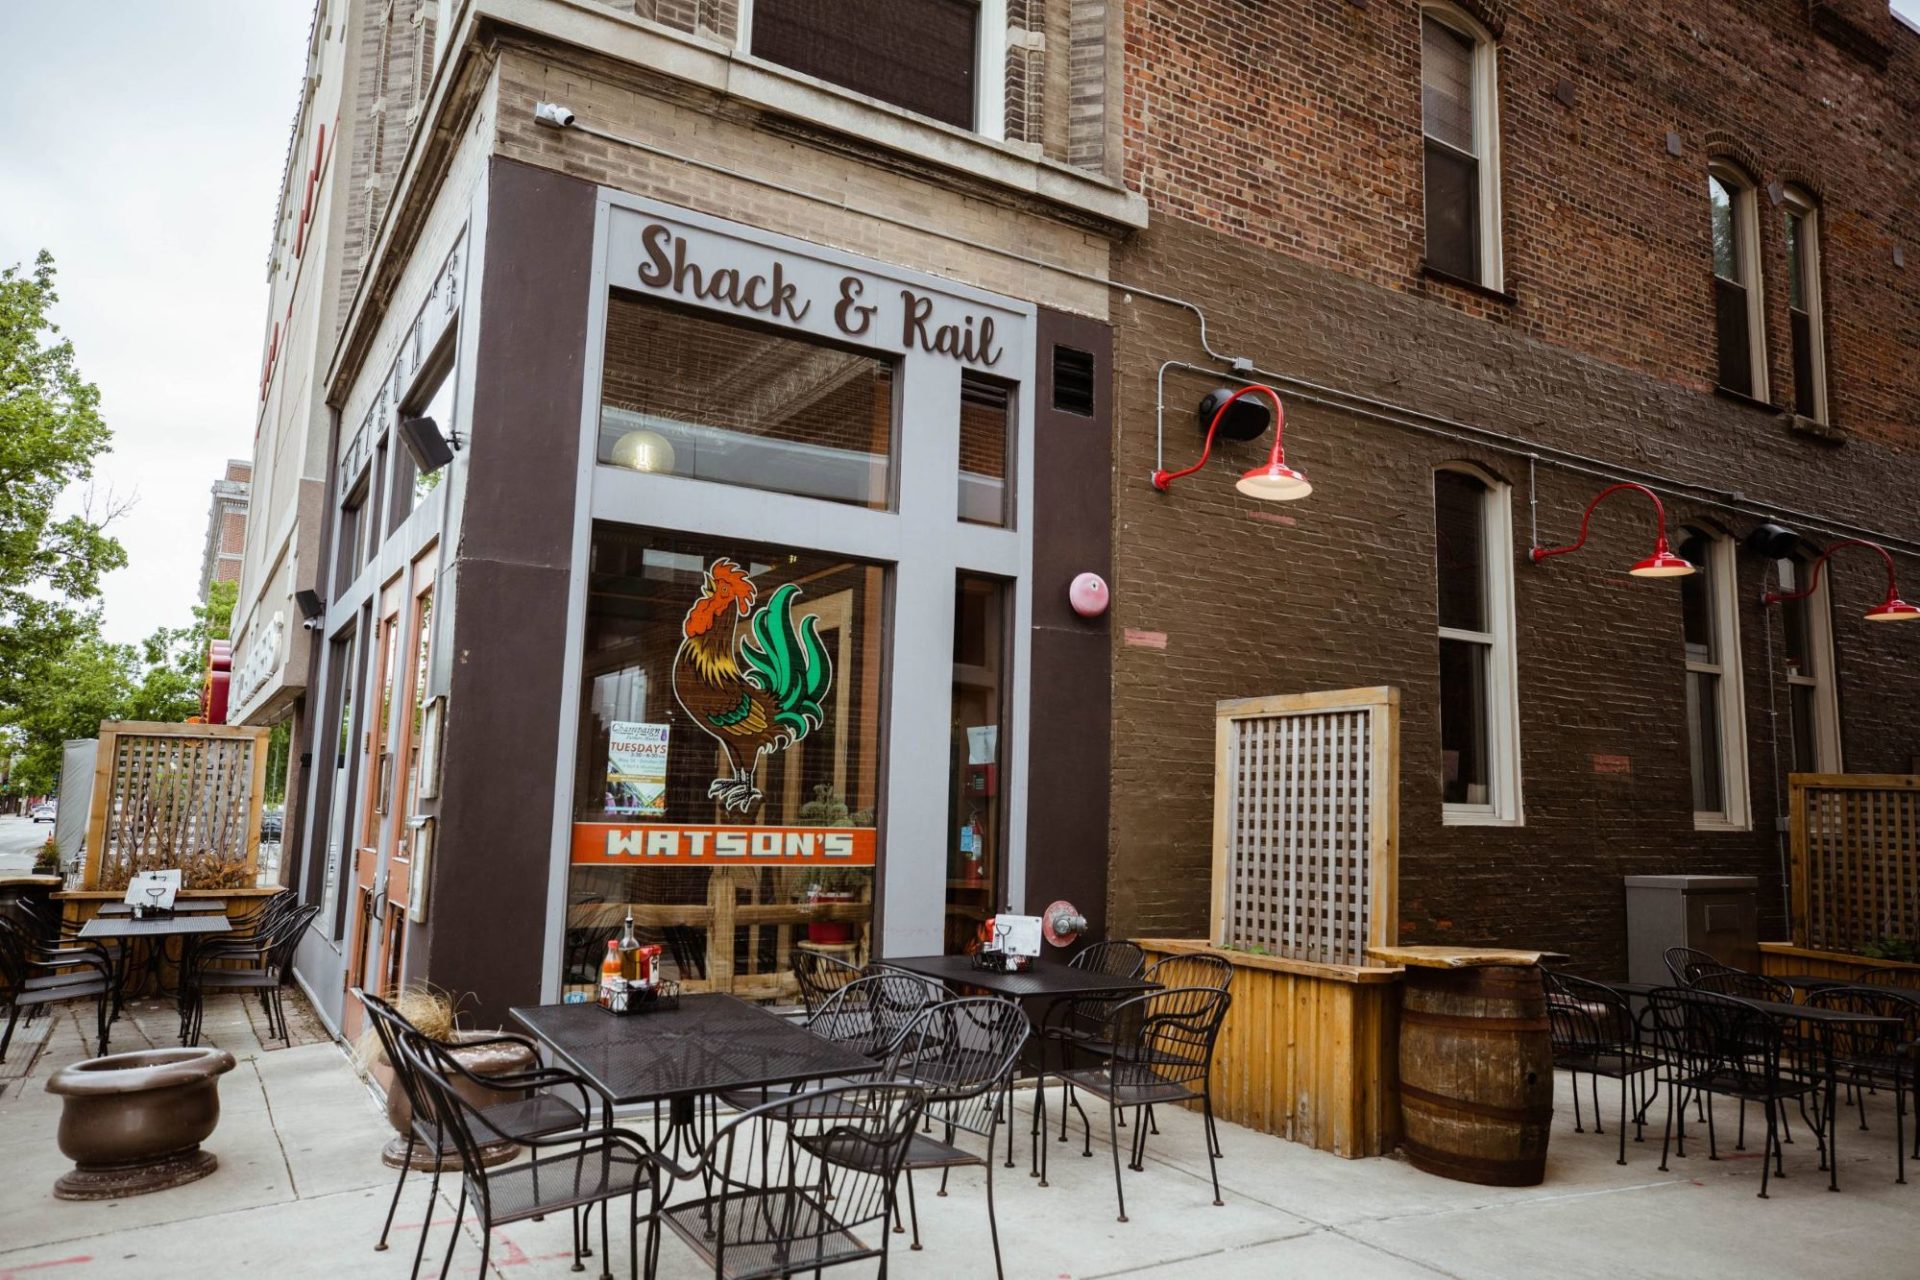 The corner of a brick building with black patio tables and chairs in front of it. On one of the windows is a red and green painted rooster, and on the building above it says Shack & Rail in black script.